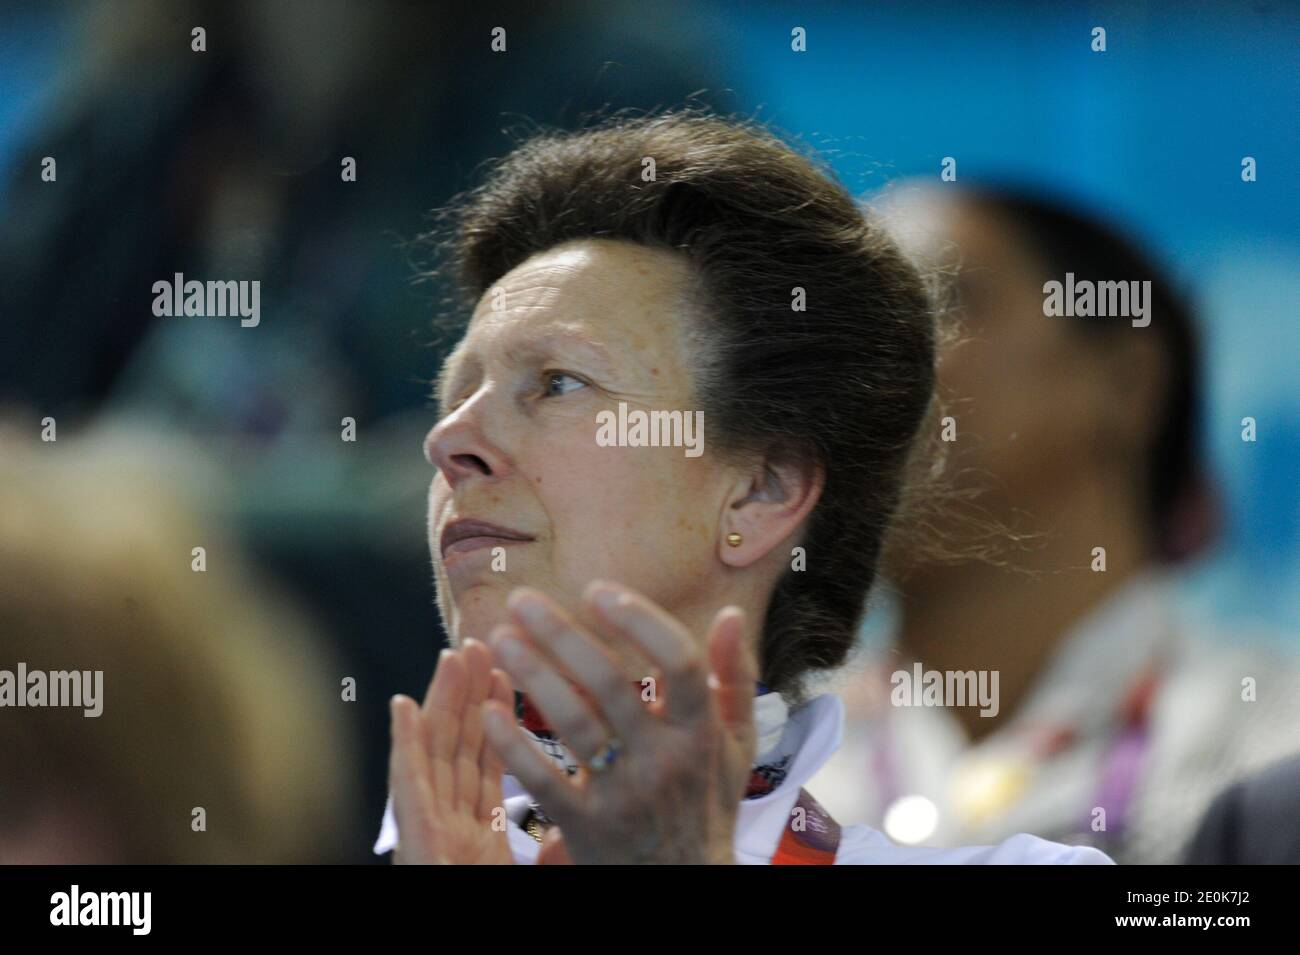 Princess Ann attends the Swimming Final Event at the London 2012 Olympic Games in London, UK on August 3rd, 2012. Photo by Henri Szwarc/ABACAPRESS.COM Stock Photo